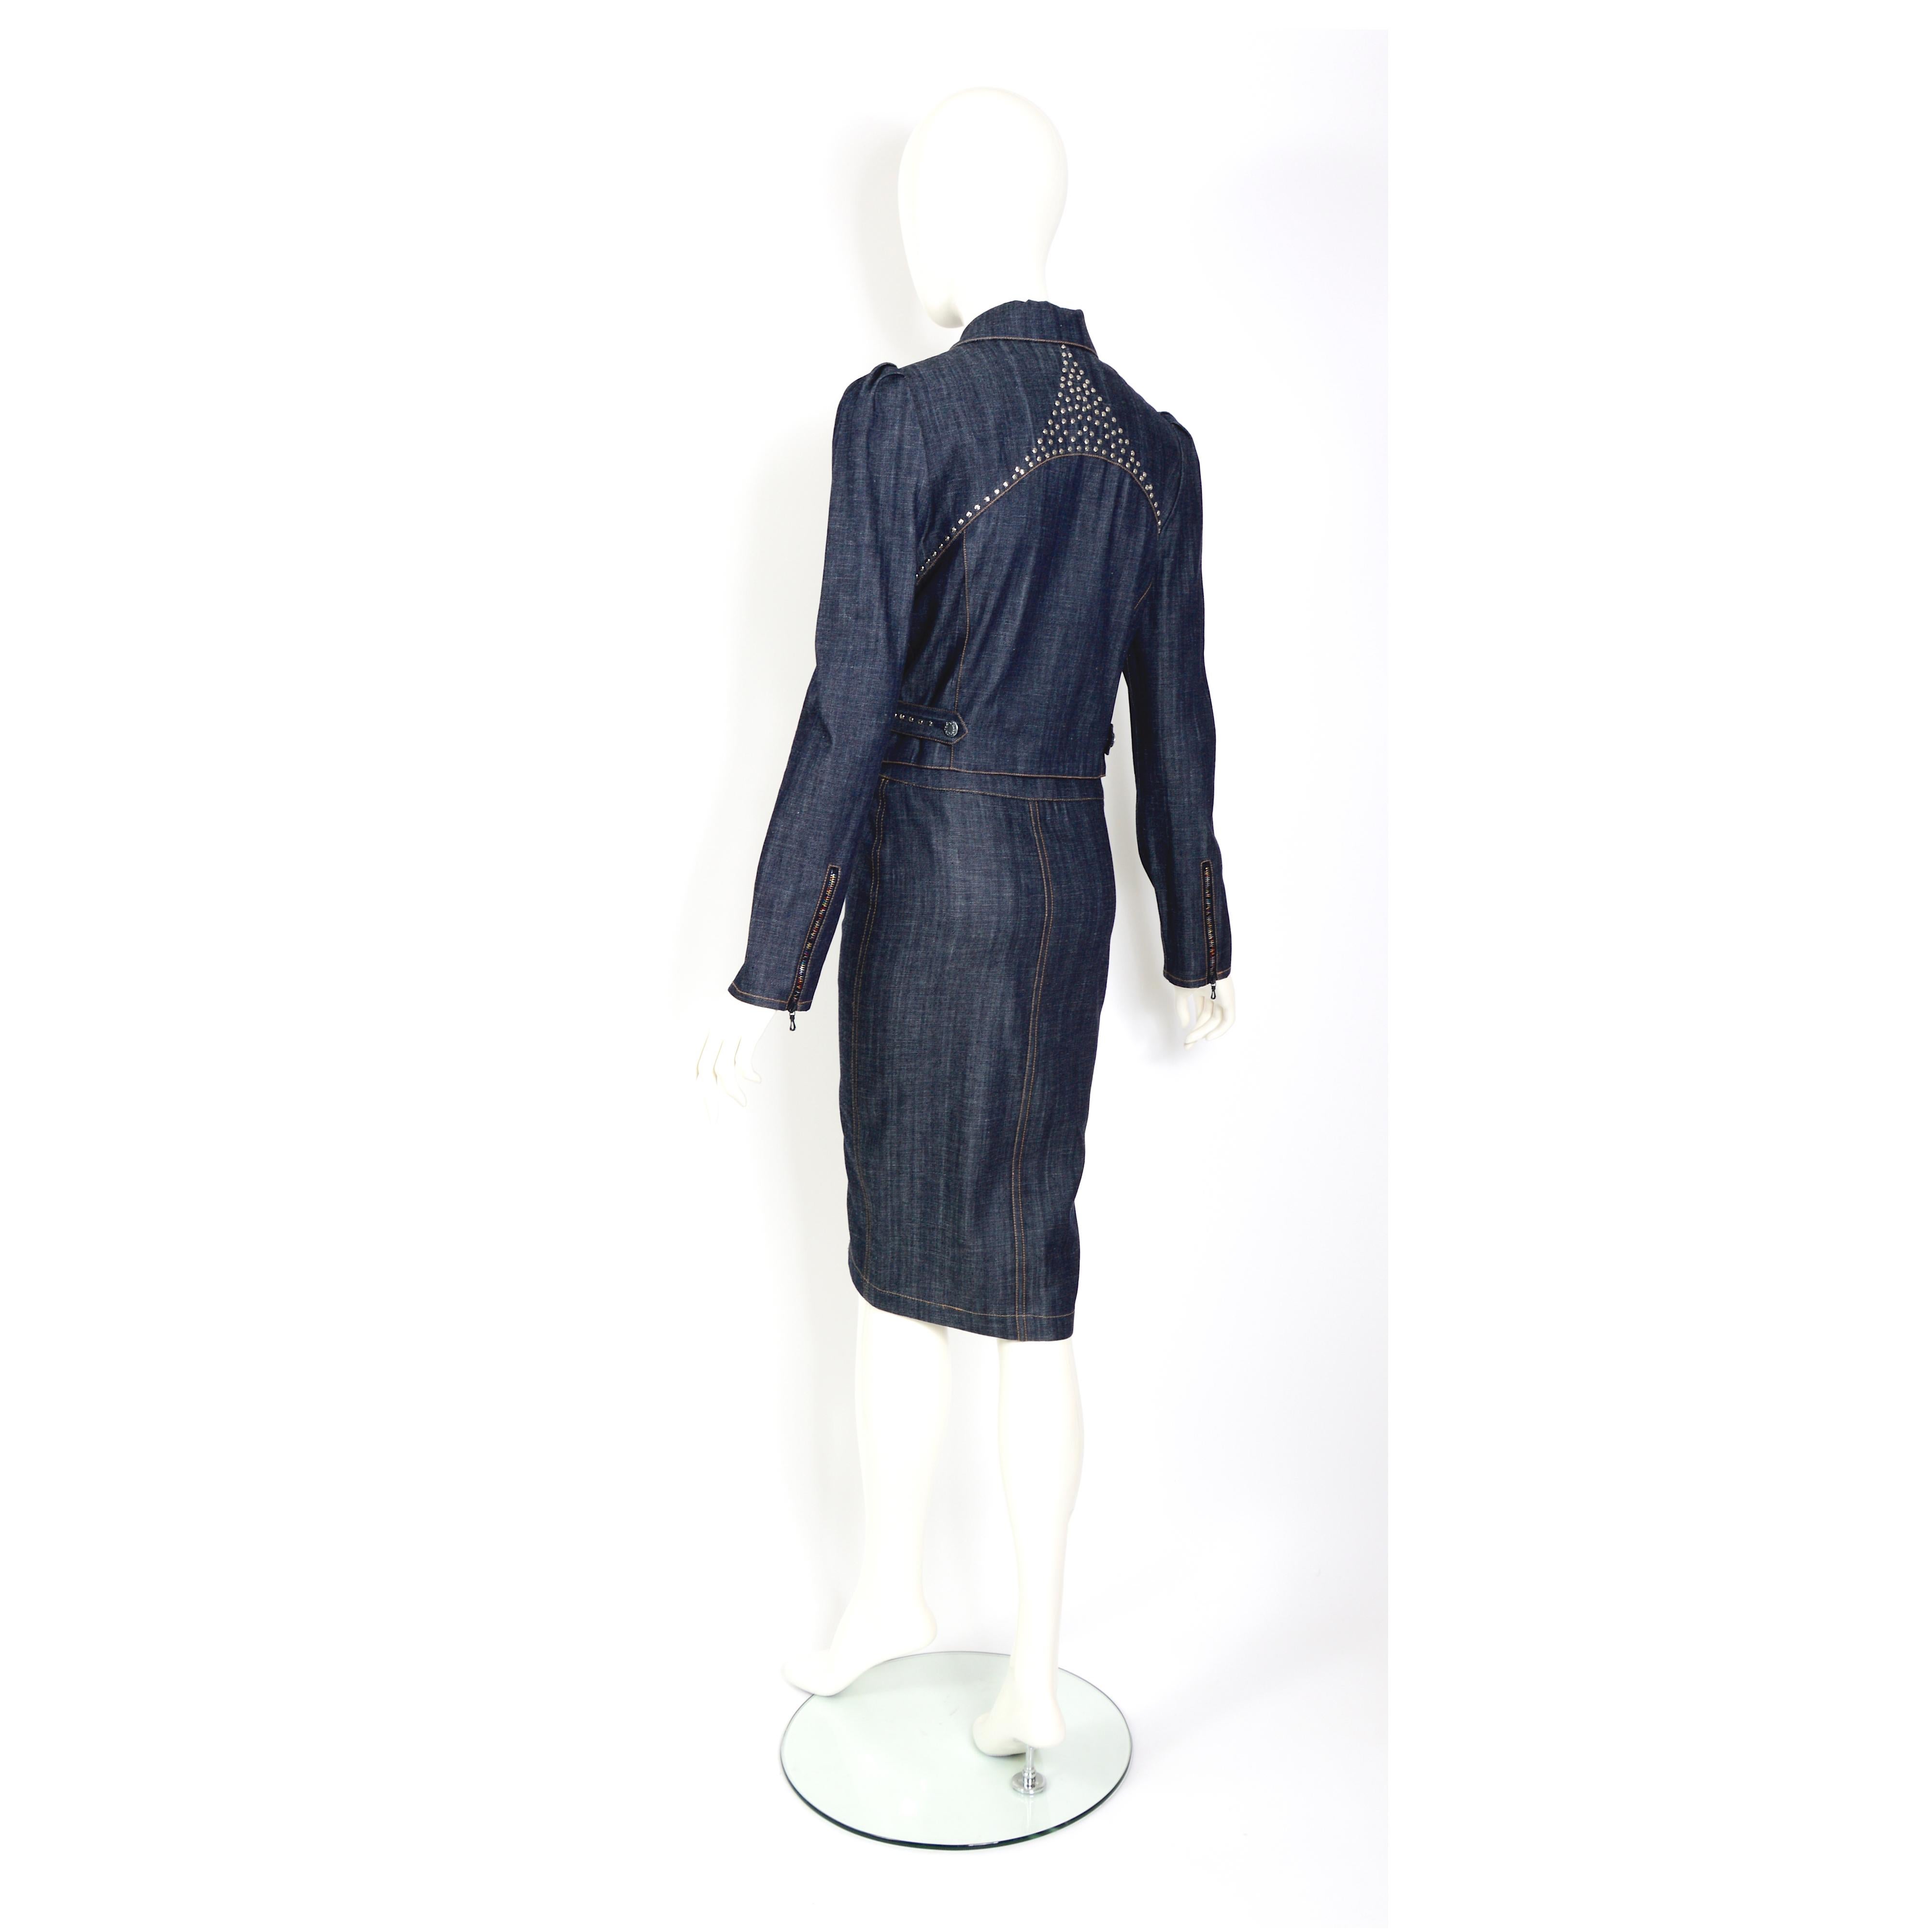 Chloé by Stella McCartney vintage 2001 denim jacket and skirt set In Excellent Condition For Sale In Antwerpen, Vlaams Gewest